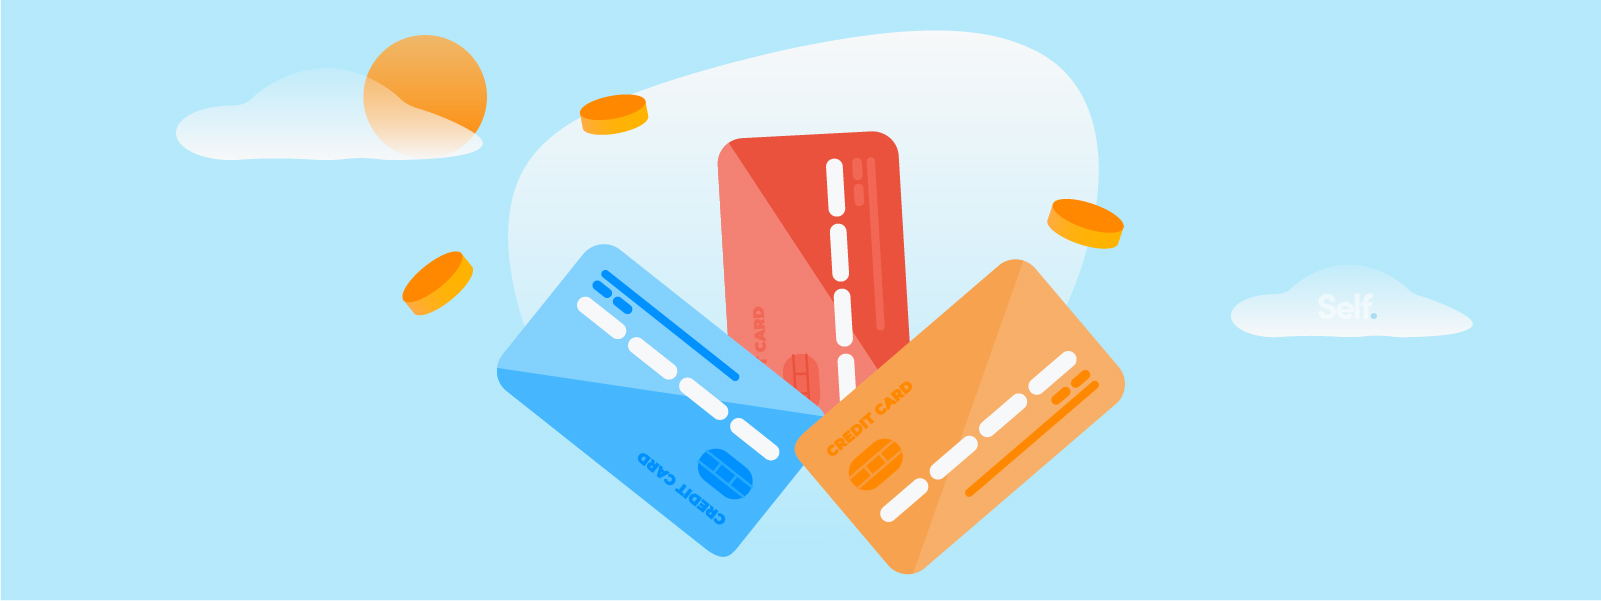 Choosing the right credit card for you.